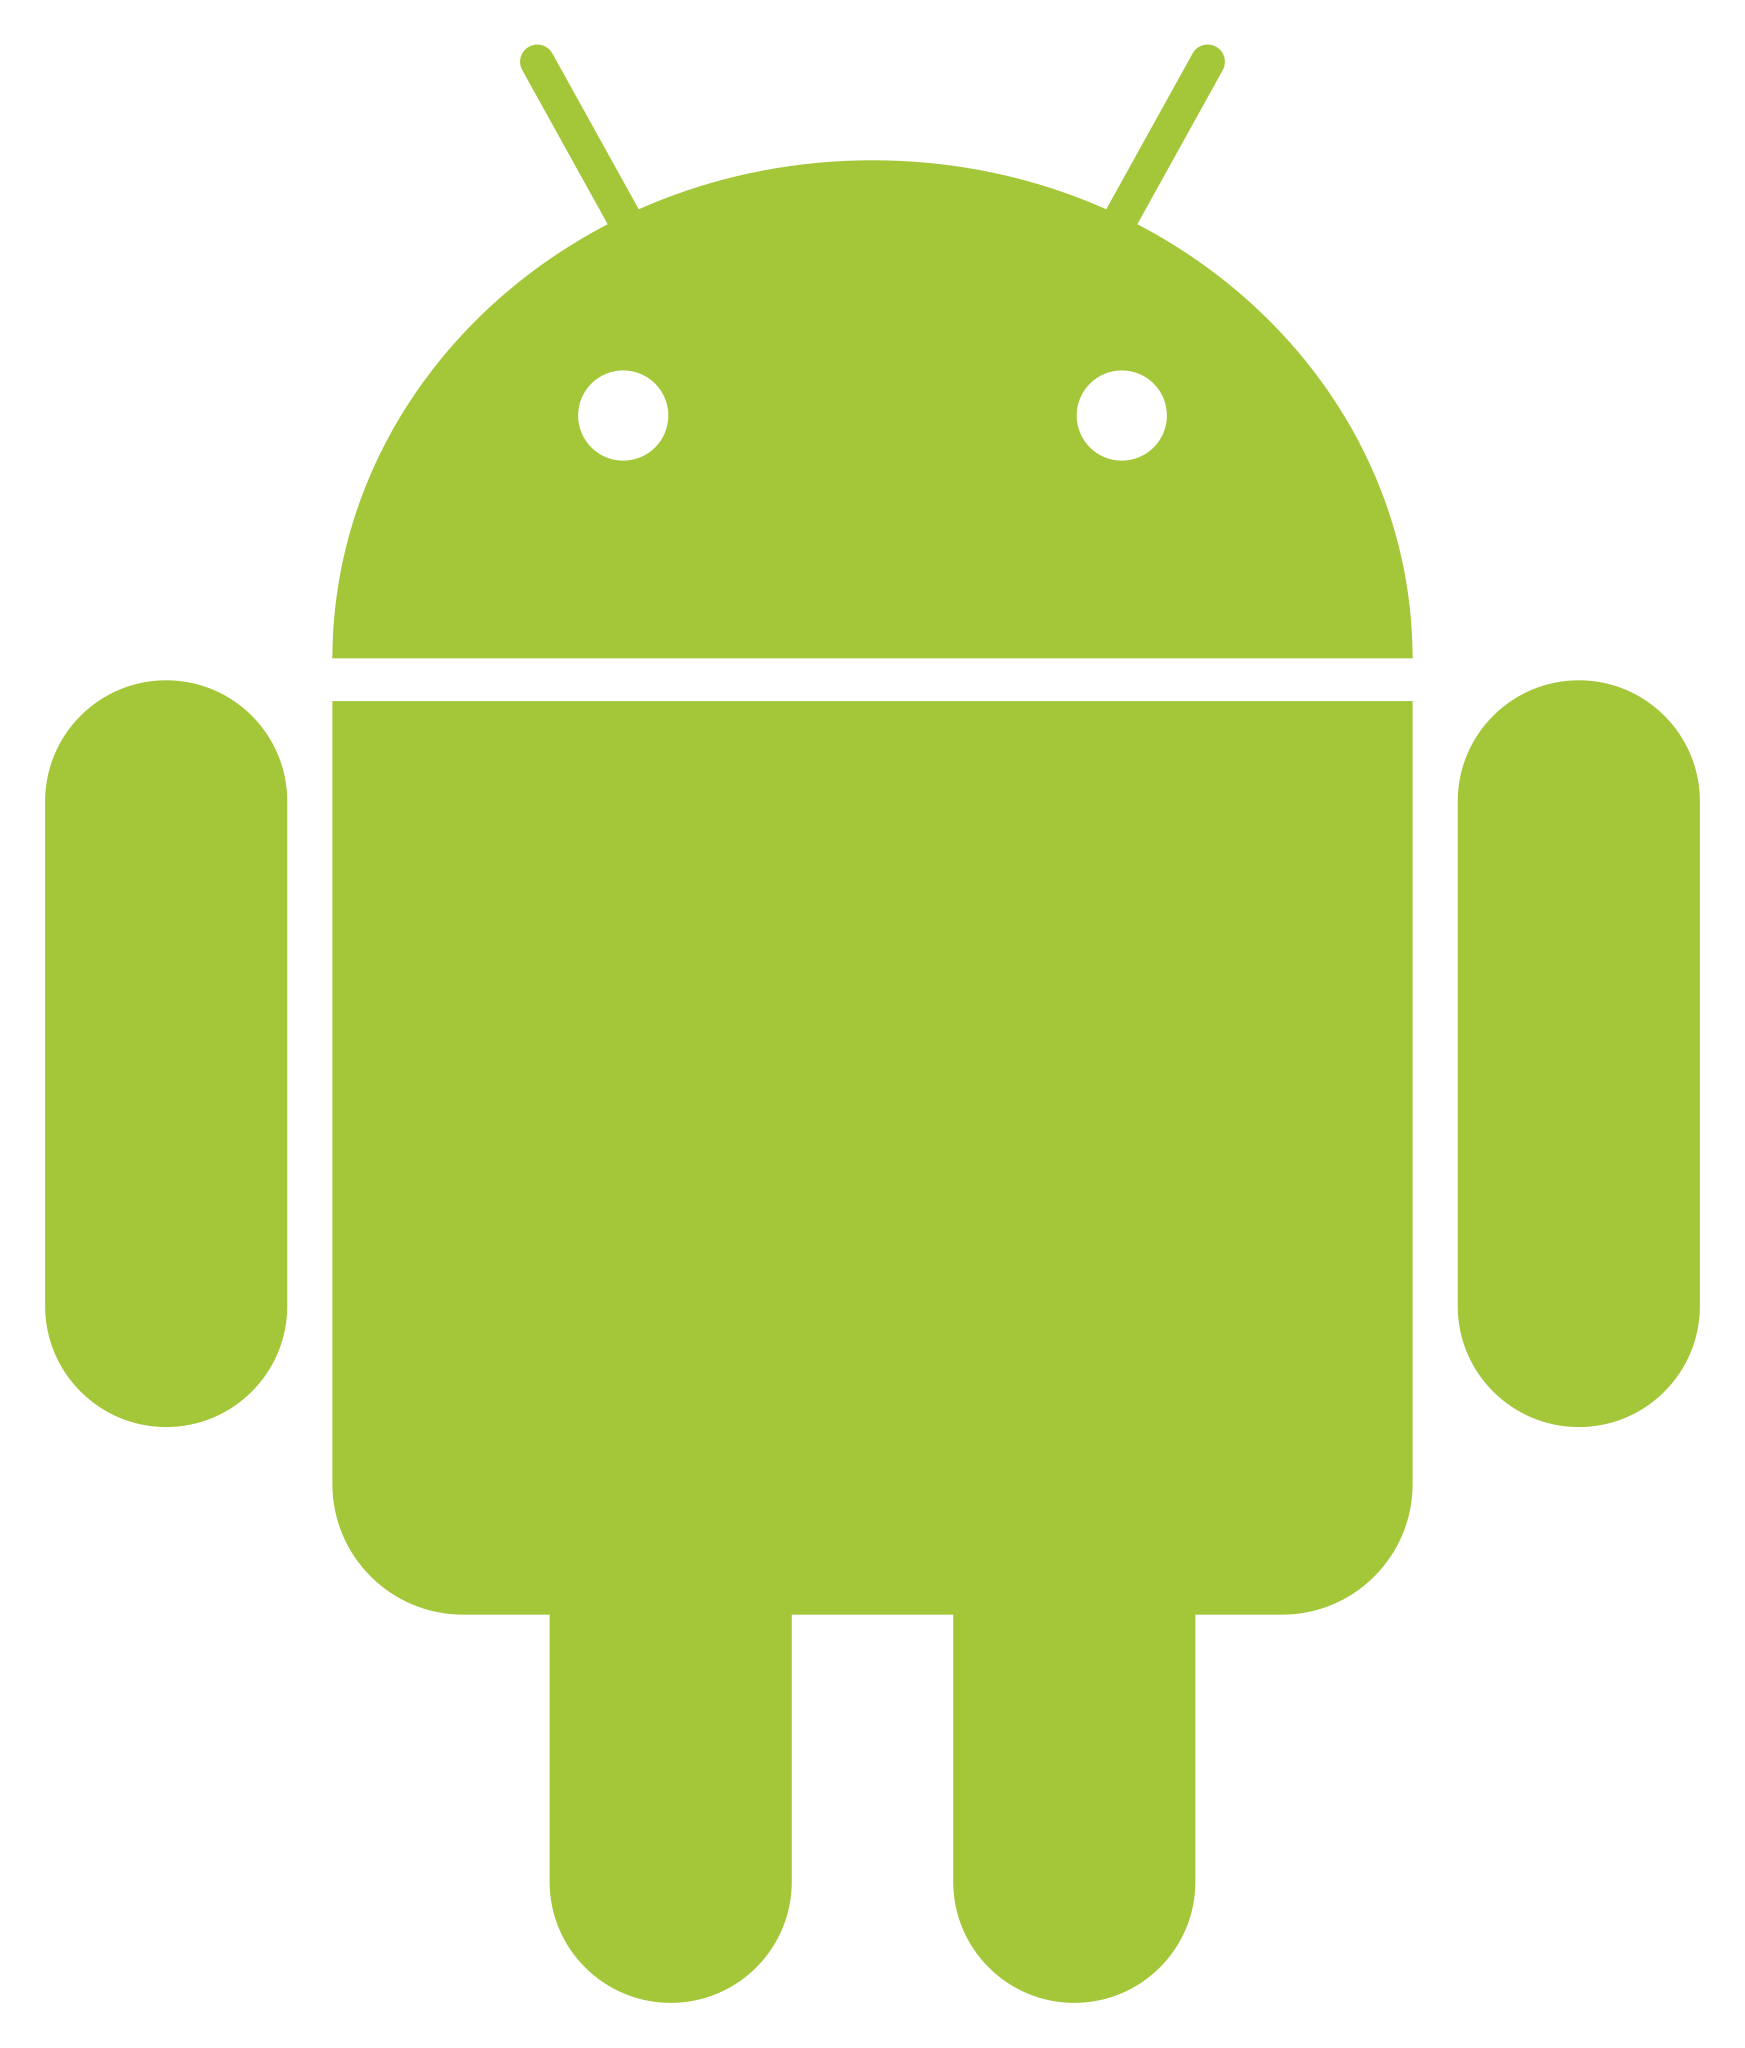 Android_robot.svg